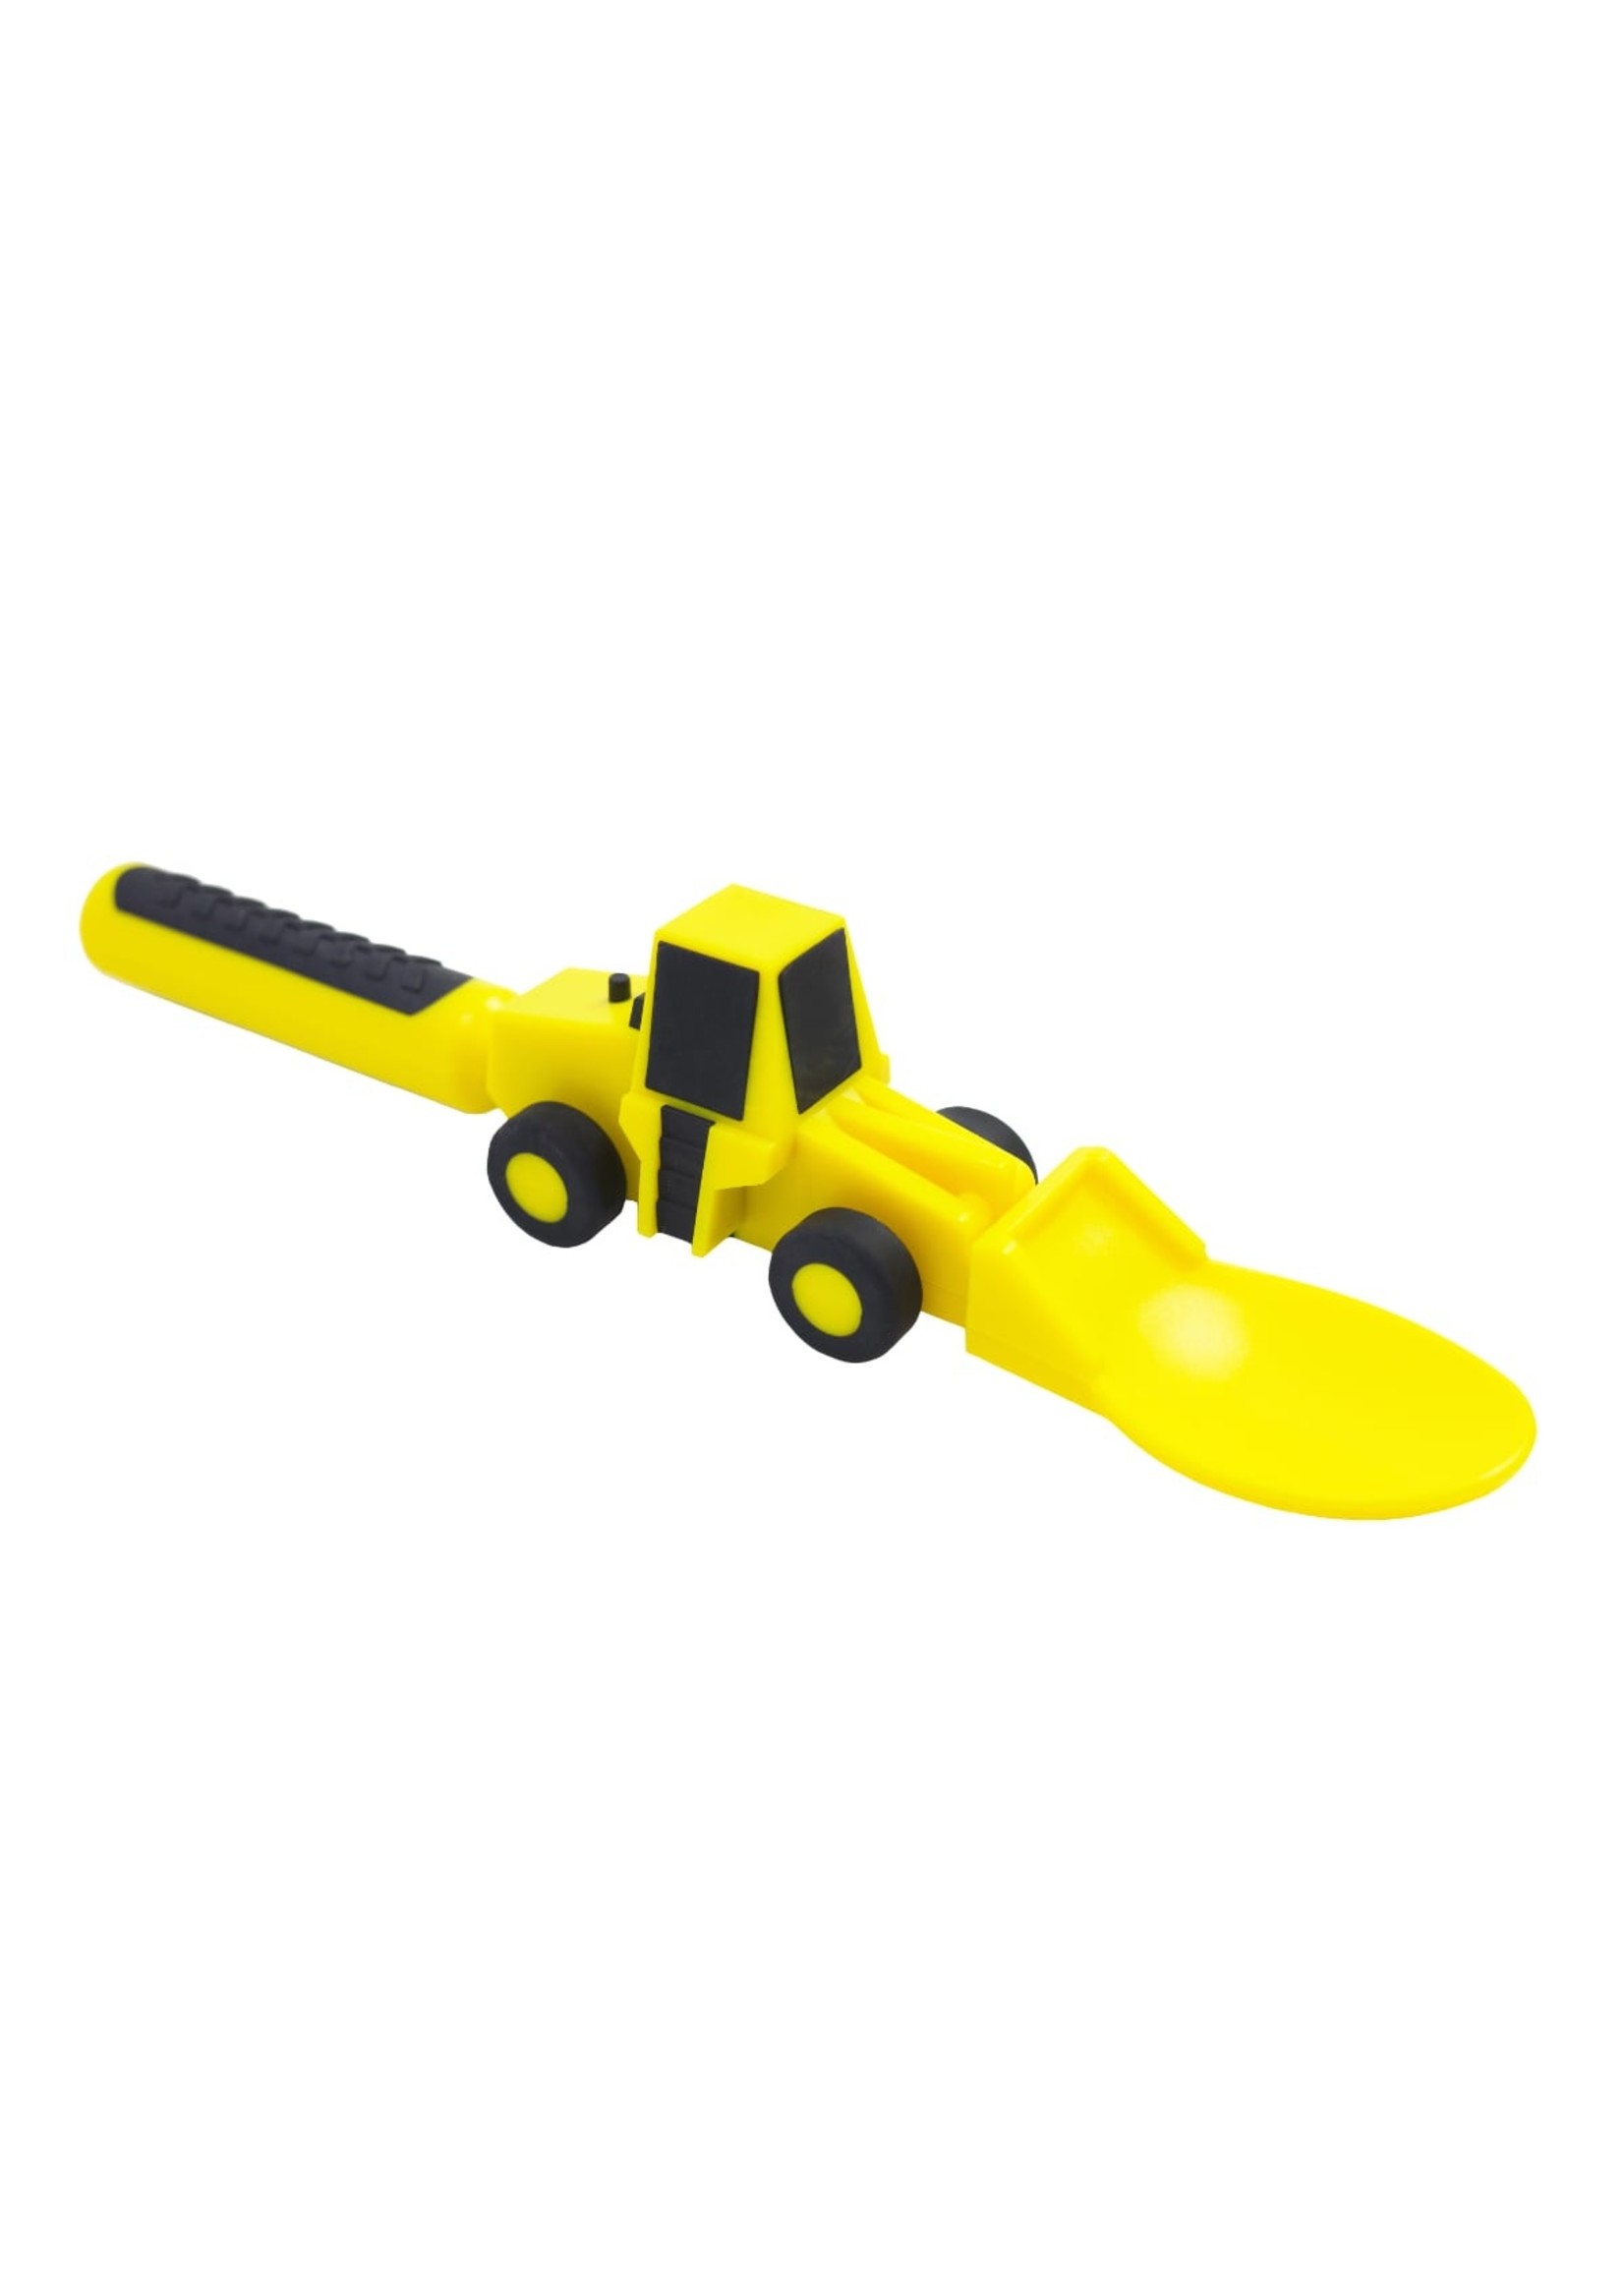 Constructive Eating Front Loader Spoon